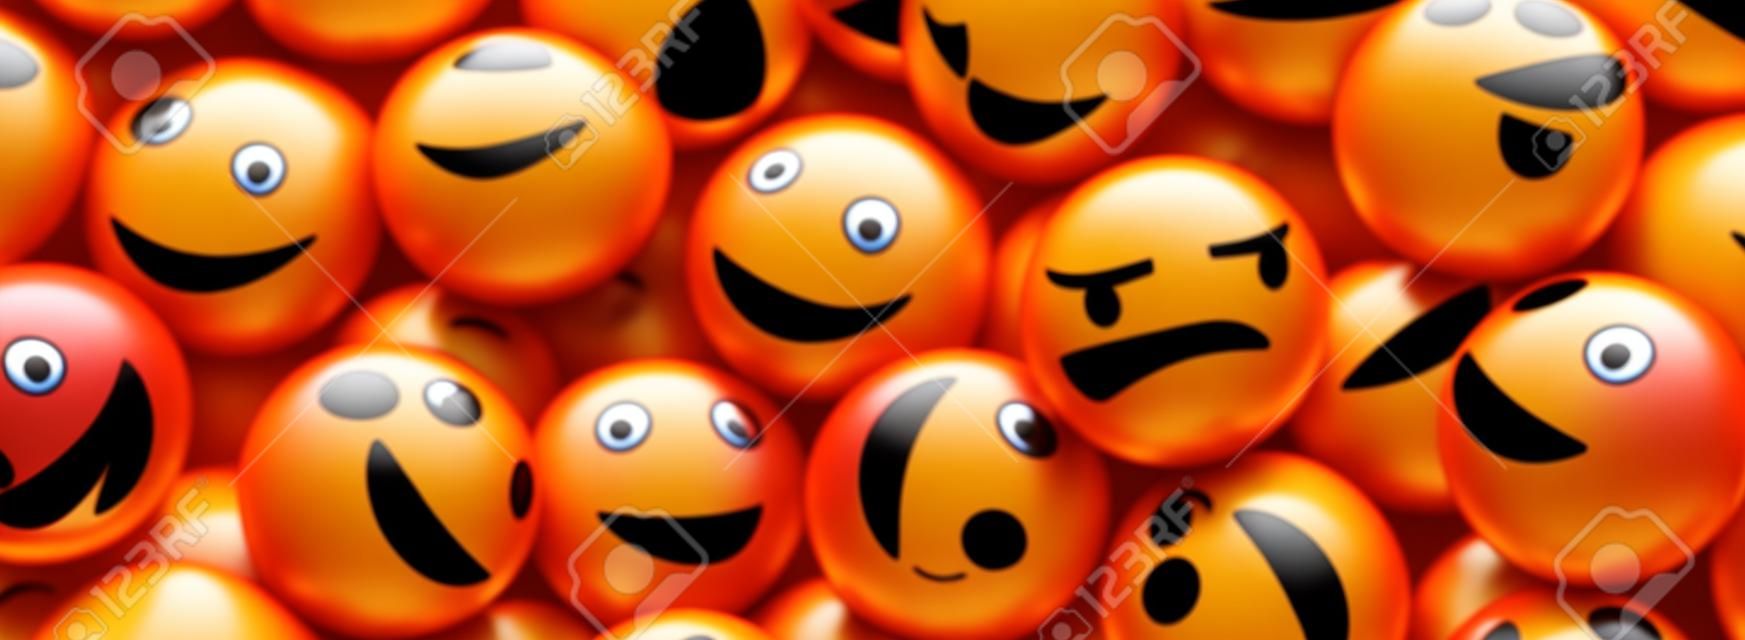 Angry Emoji Between A Bunch of Smile Emoticons. Stand Out Concept 3D Rendering Banner